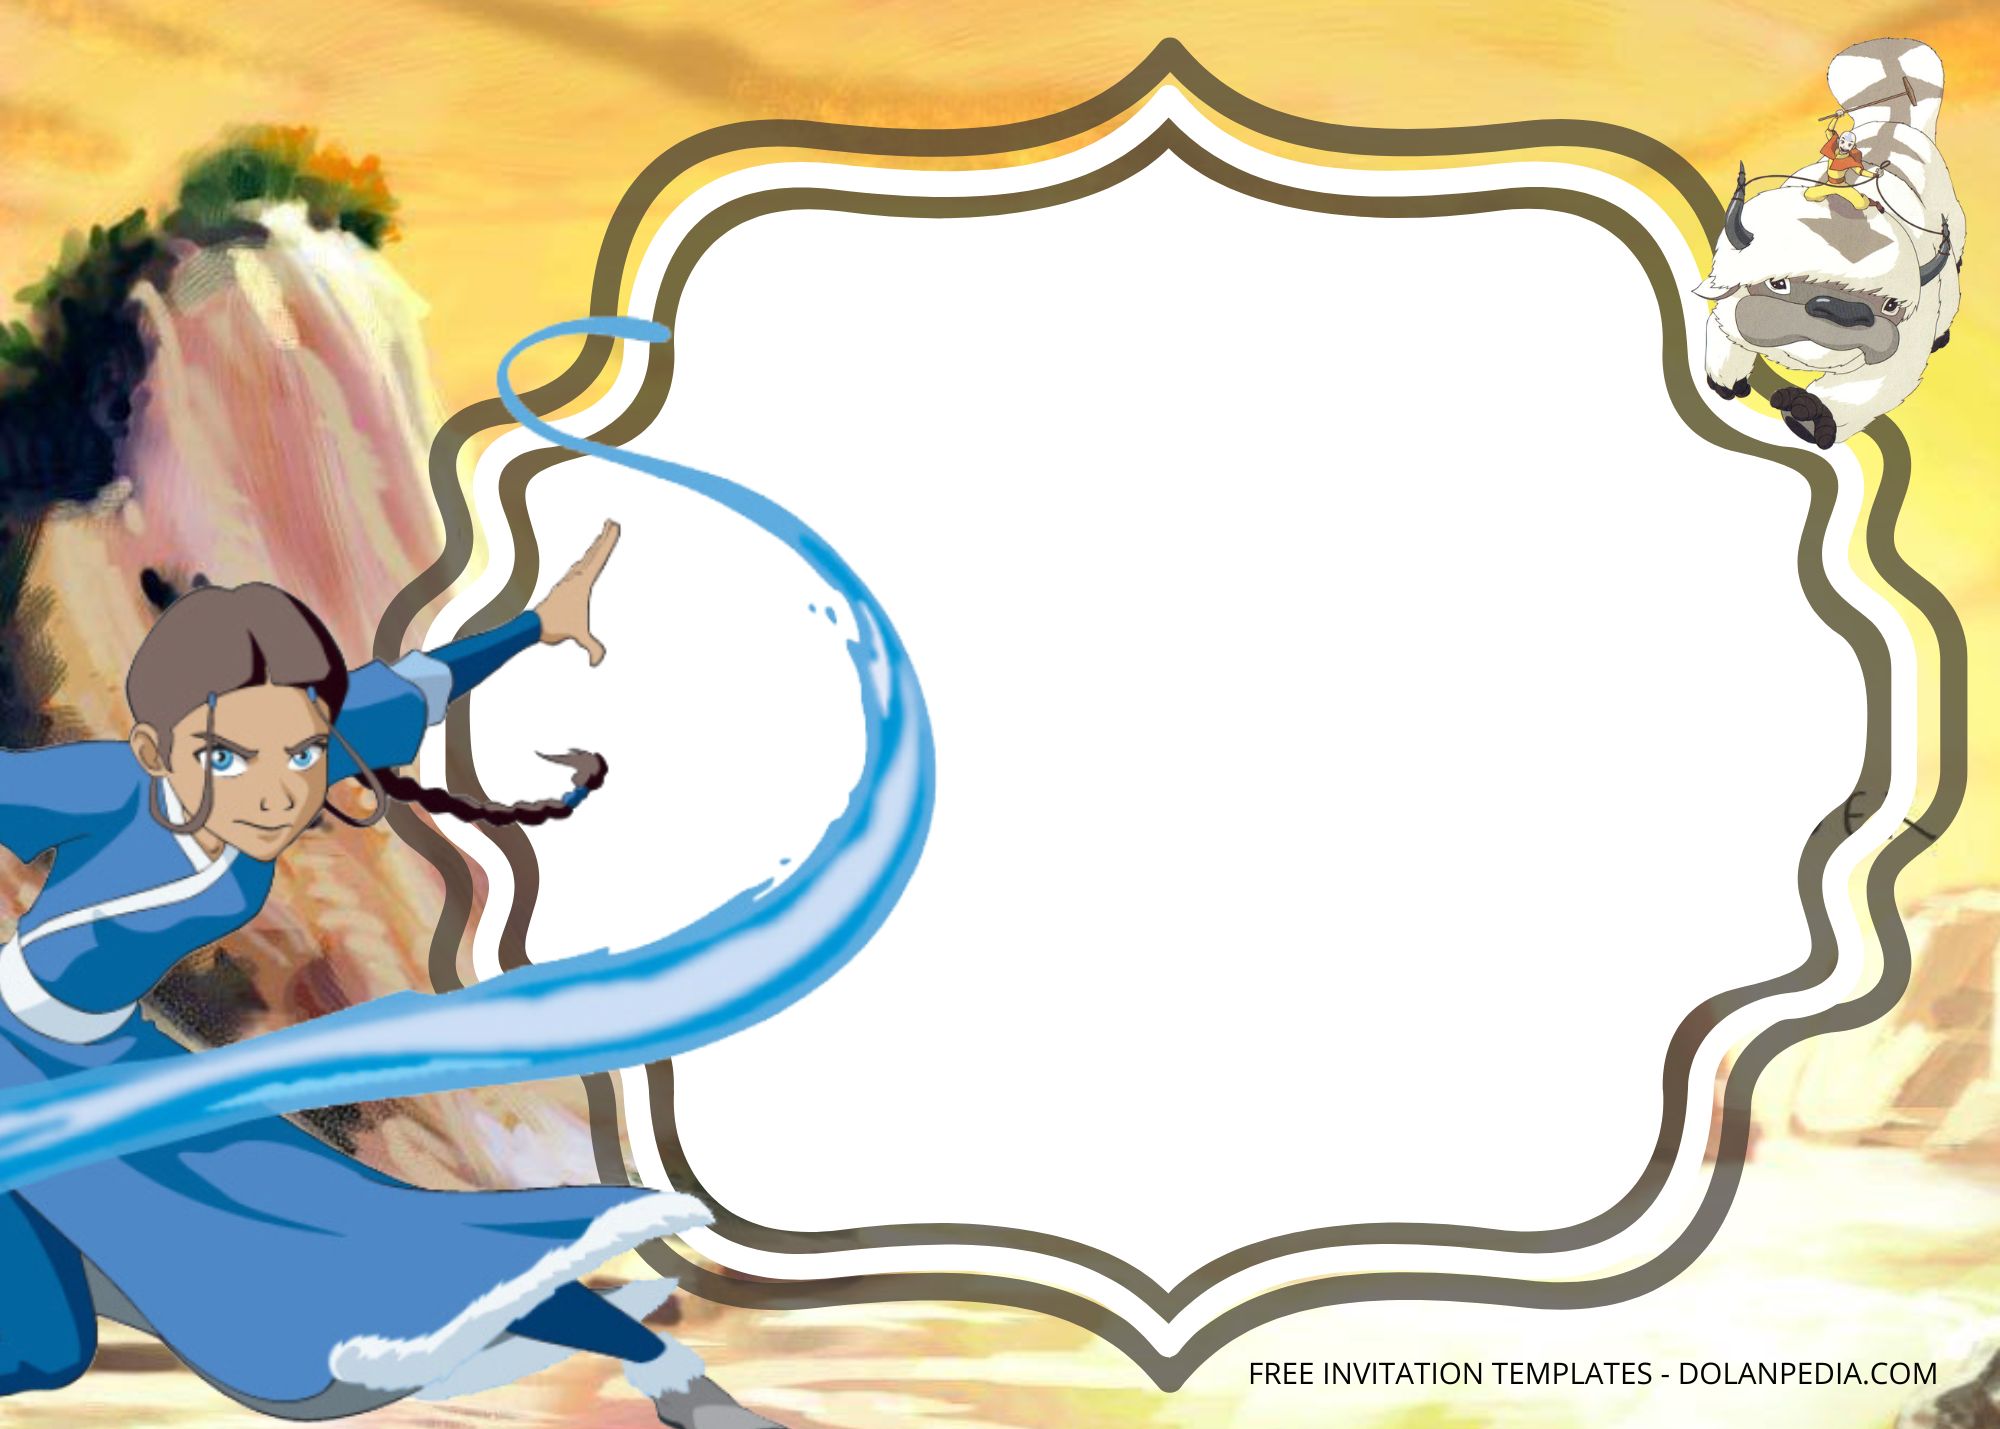 Blank Avatar The Legend of Aang Birthday Invitation Templates Two